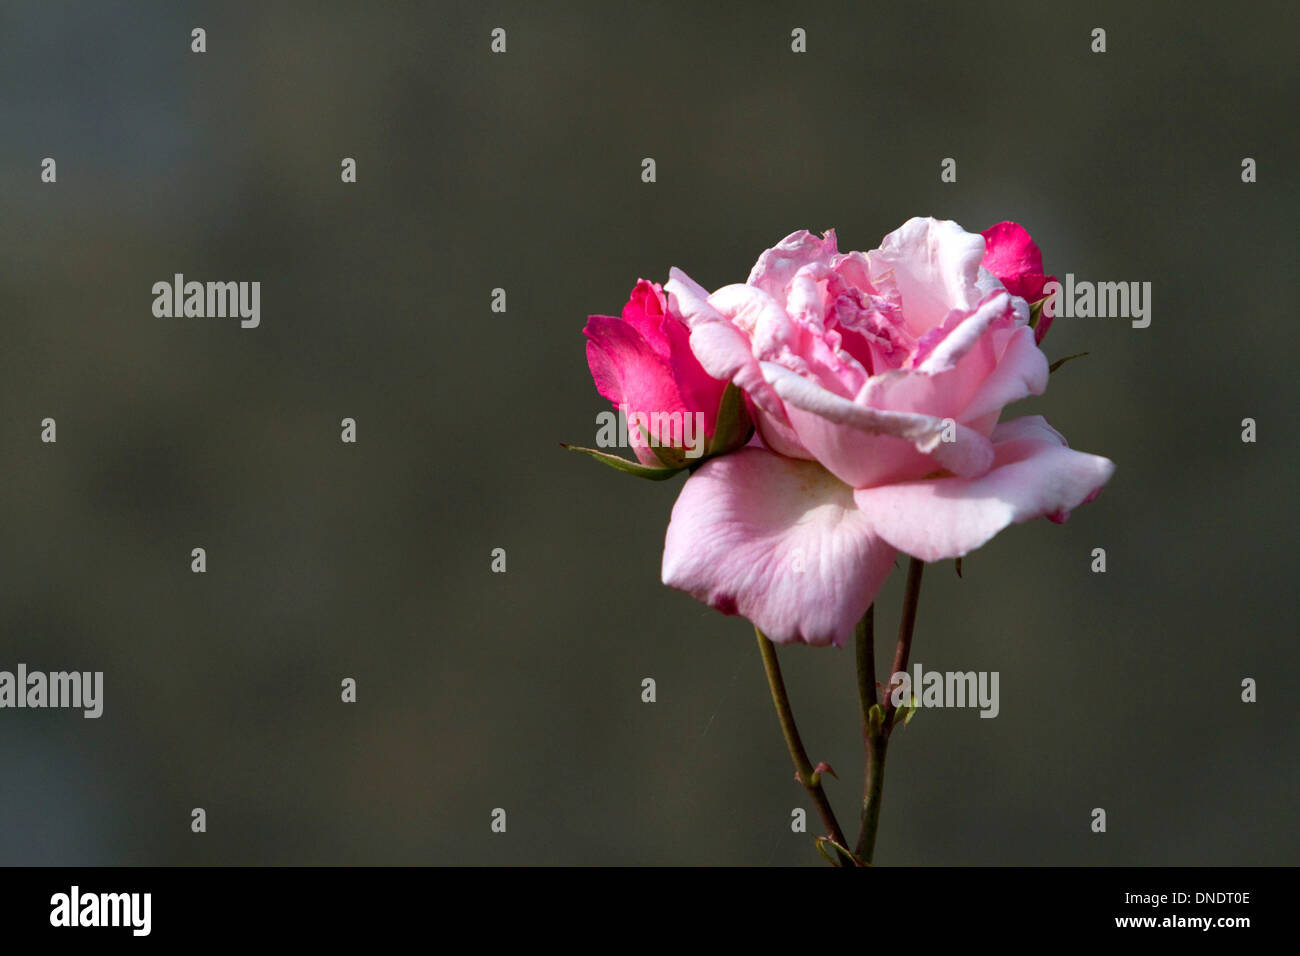 The bloom of a pink rose near Angouleme in southwestern France. Stock Photo